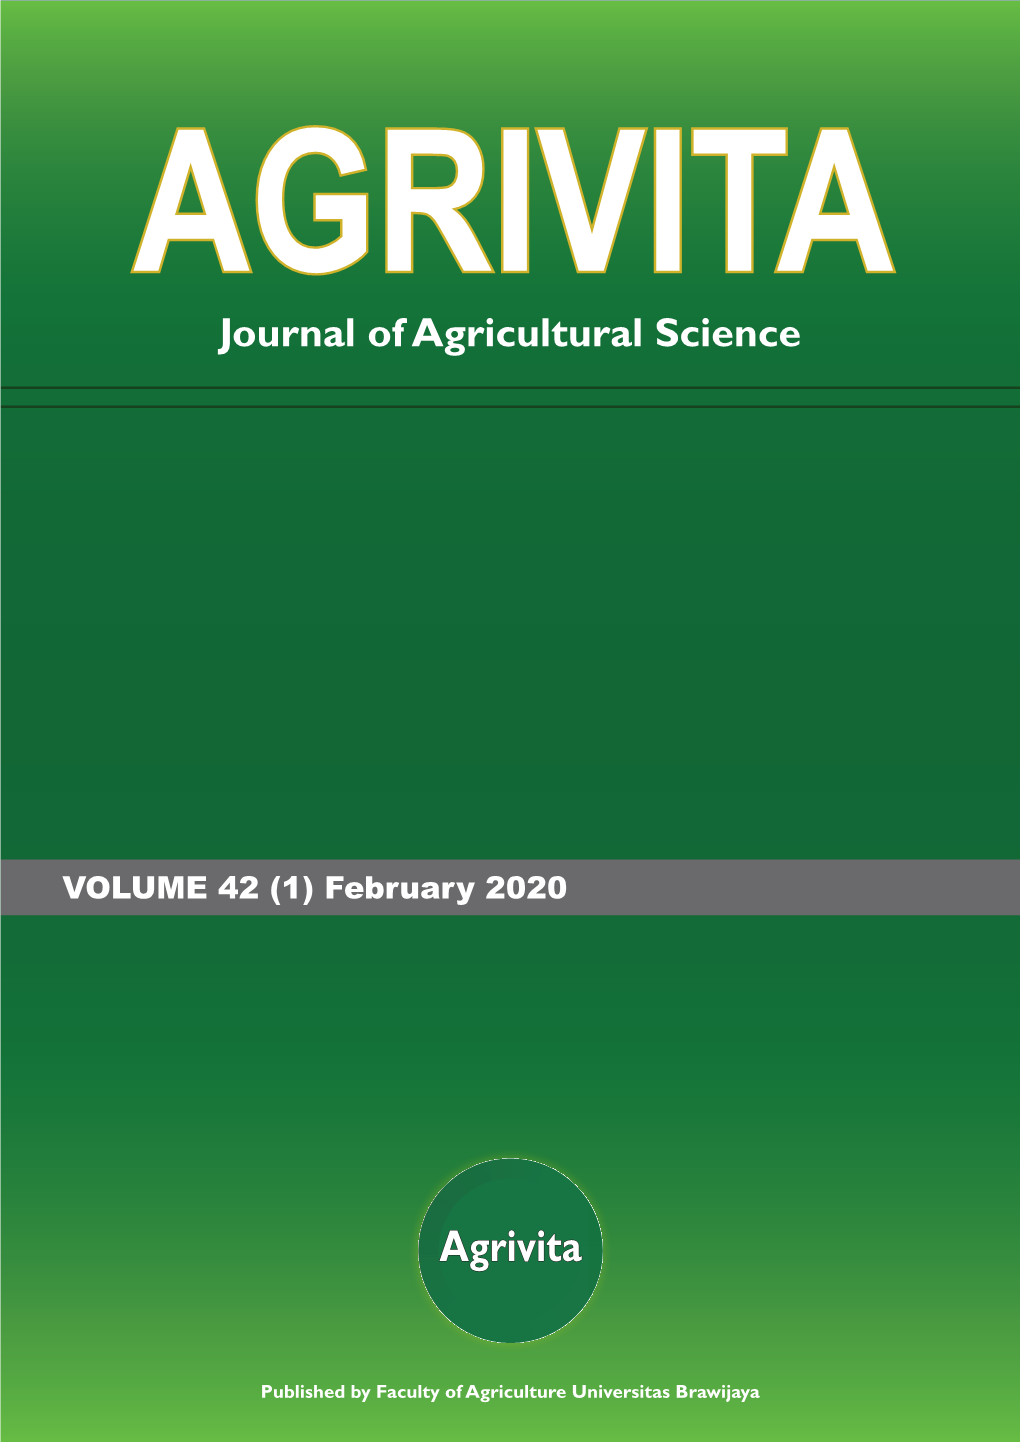 AGRIVITA, Journal of Agricultural Science